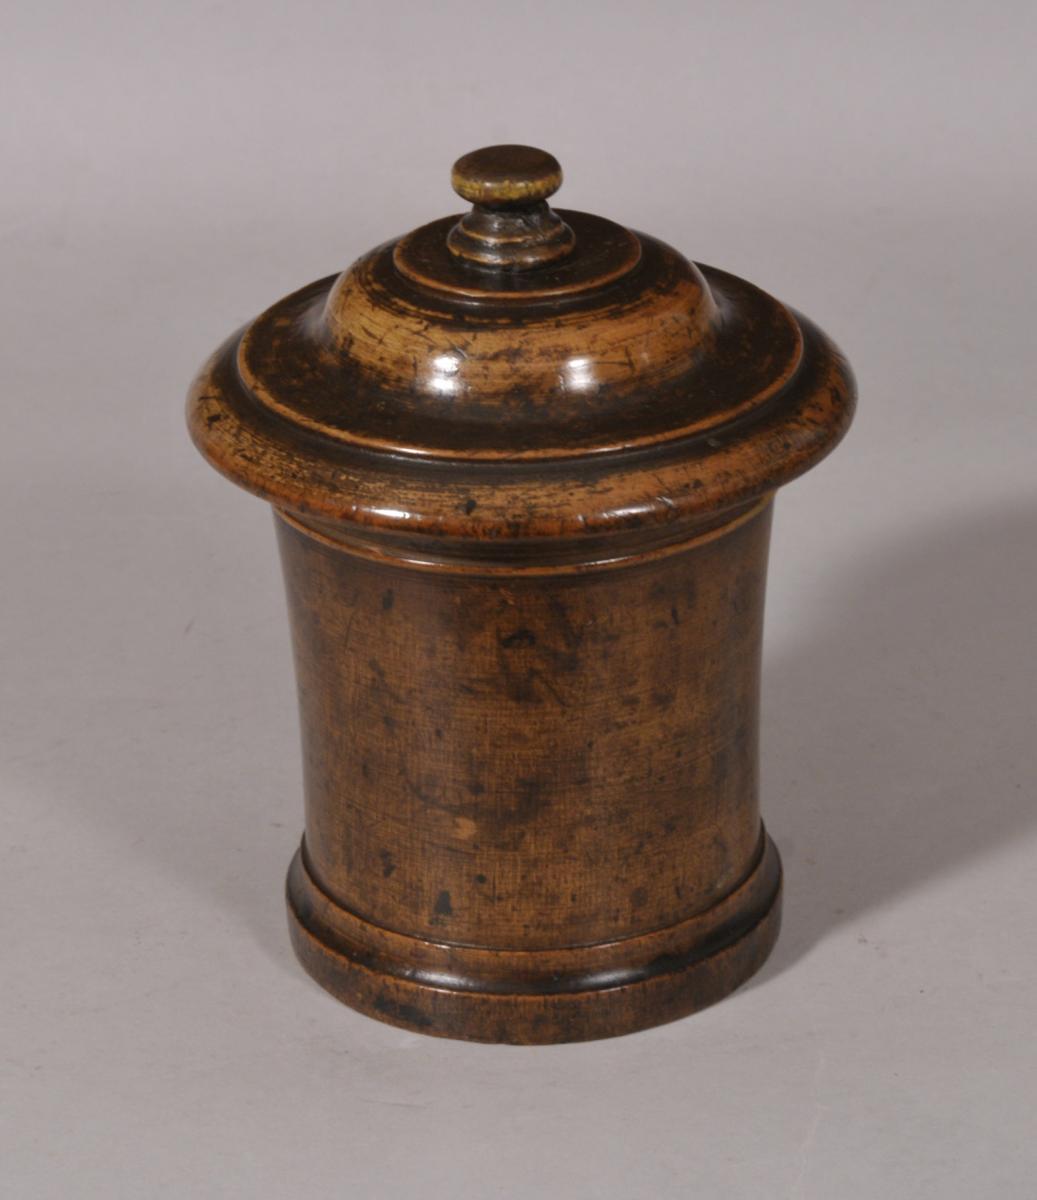 S/5779 Antique Treen 19th Century Sycamore Lidded Tobacco Jar